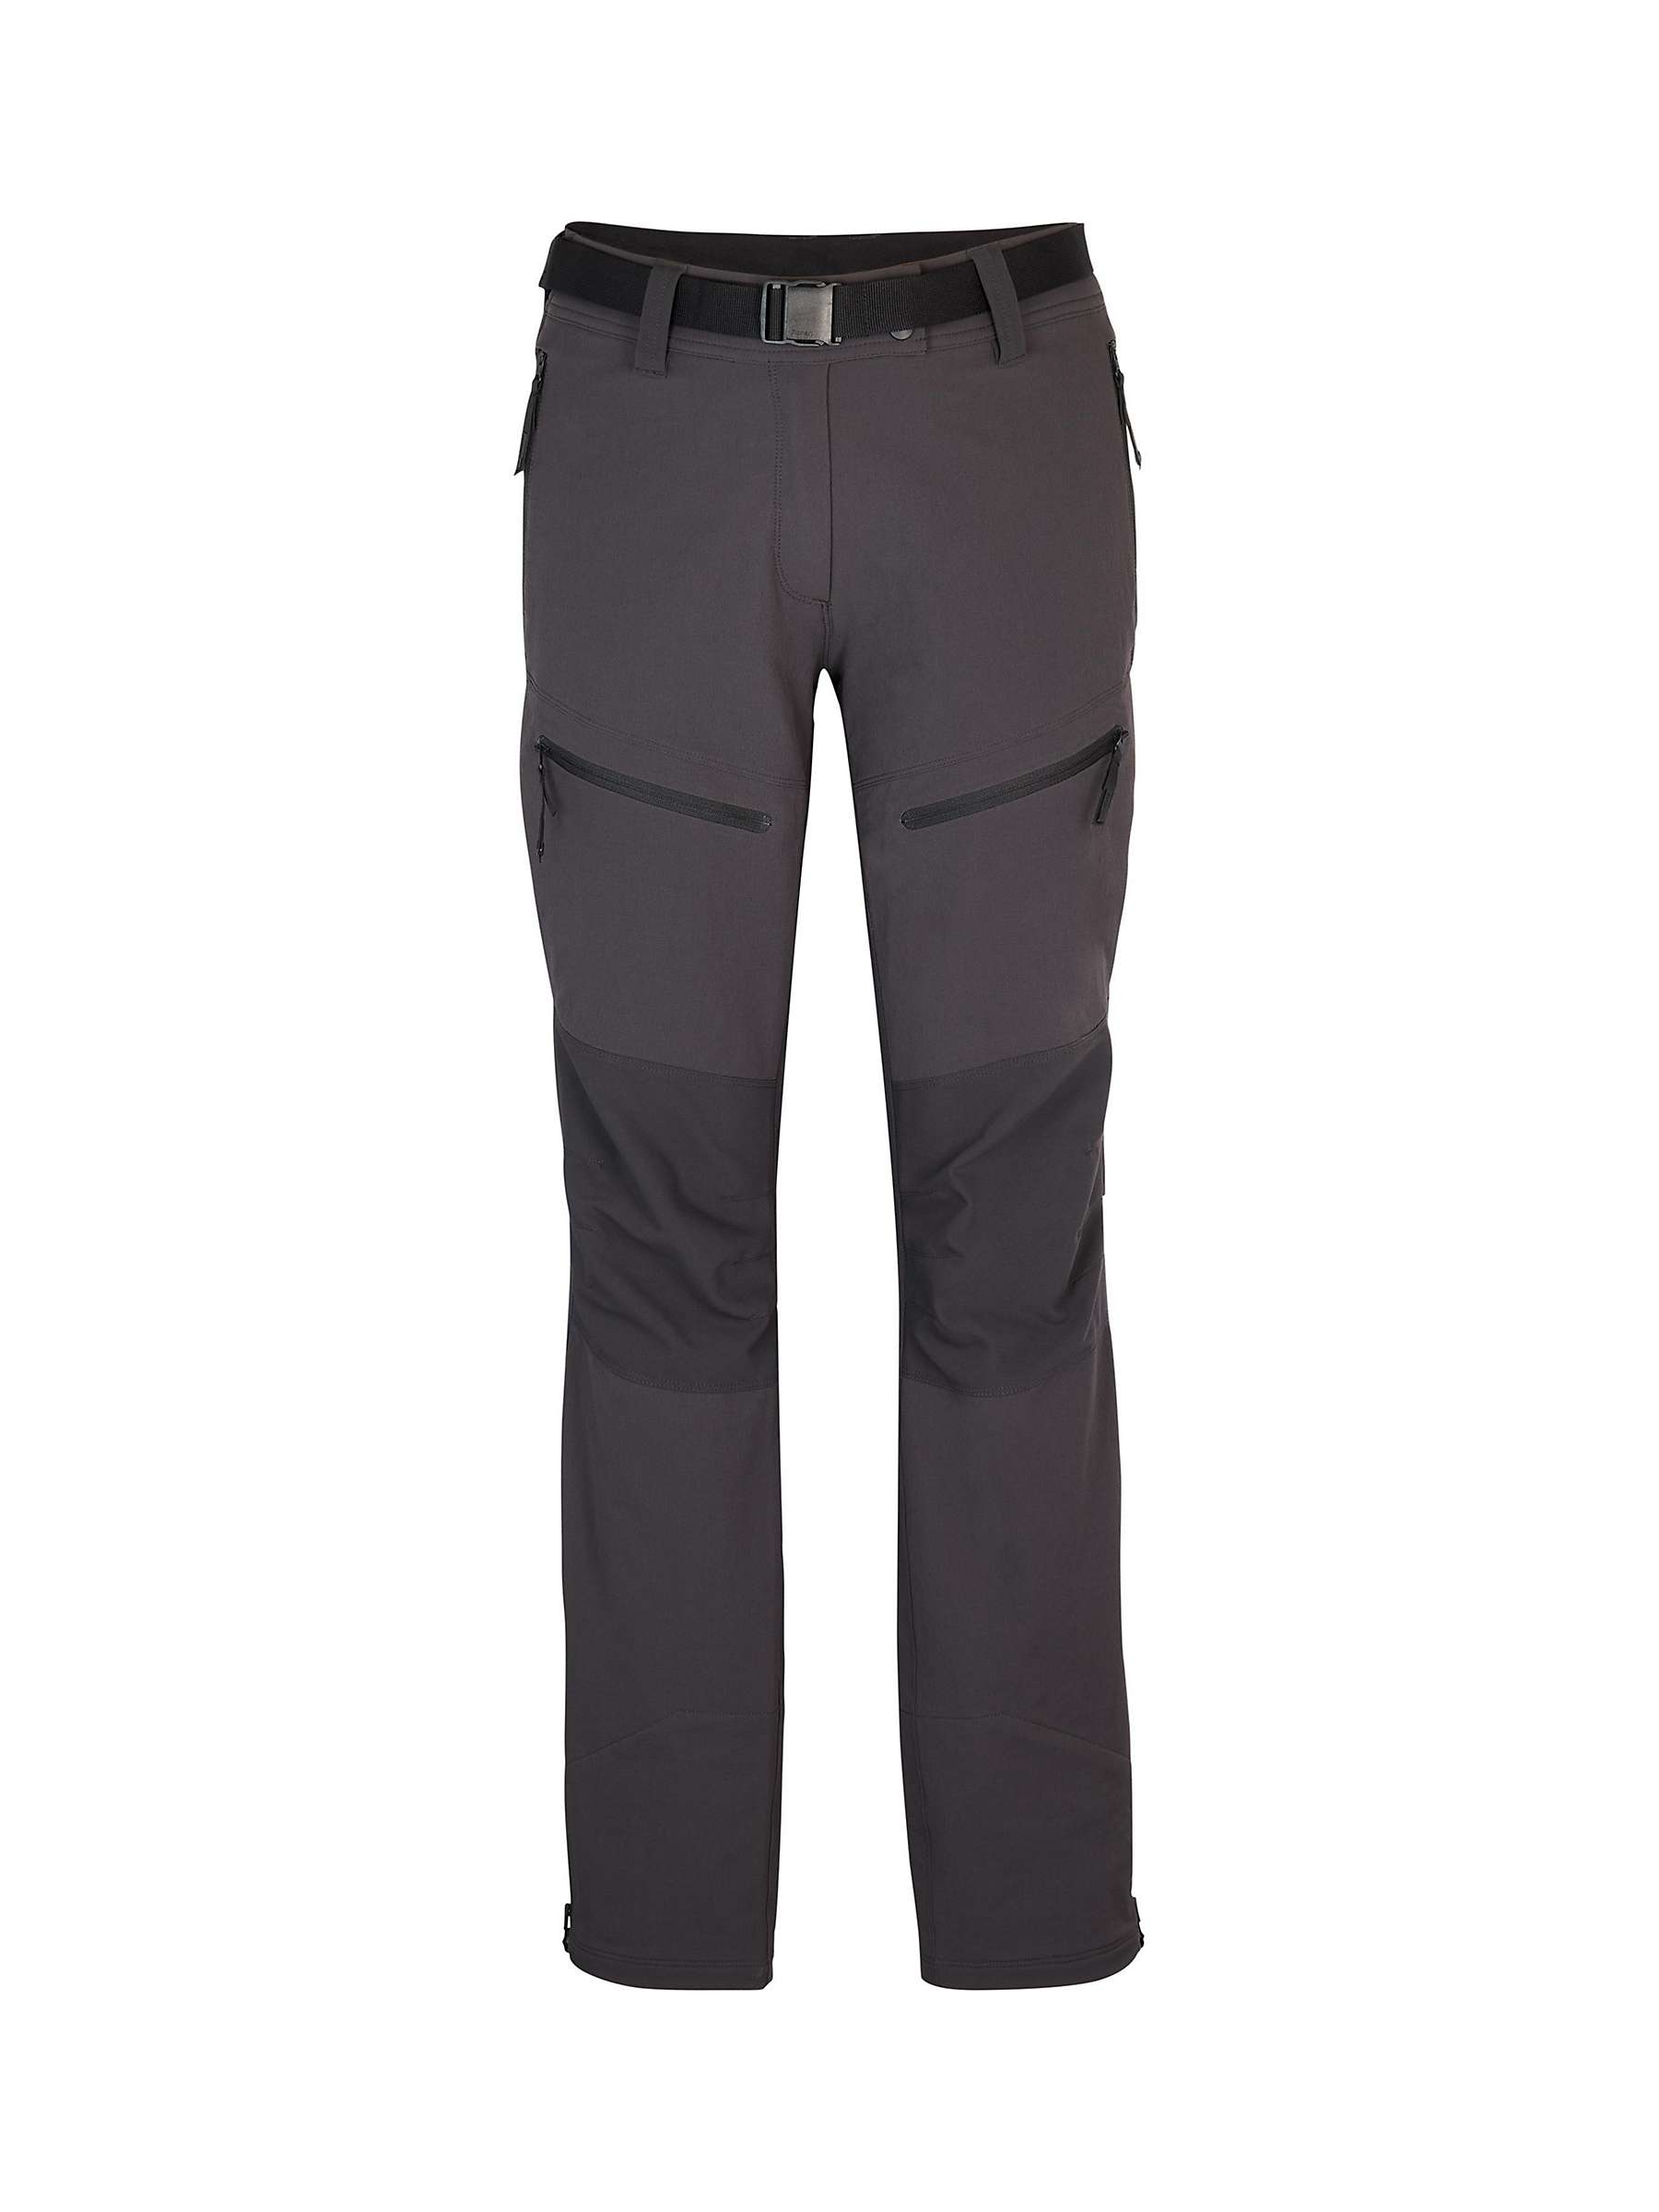 Rohan Fjell Hiking Trousers at John Lewis & Partners